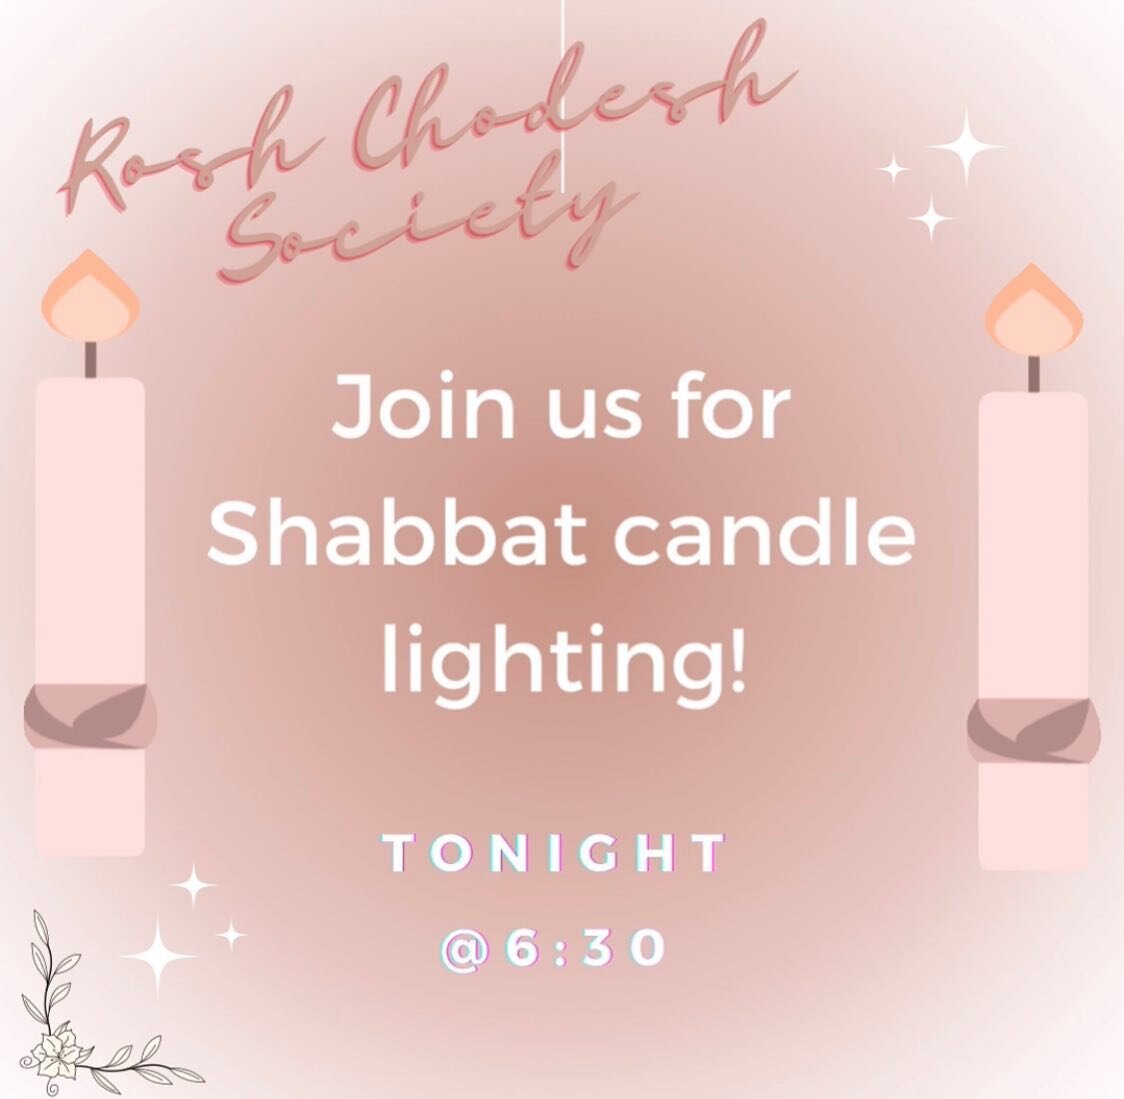 Join us TONIGHT for an incredible Shabbat candle lighting experience,  6:30pm at Chabatwood.

Chocolate truffles and apple cider!